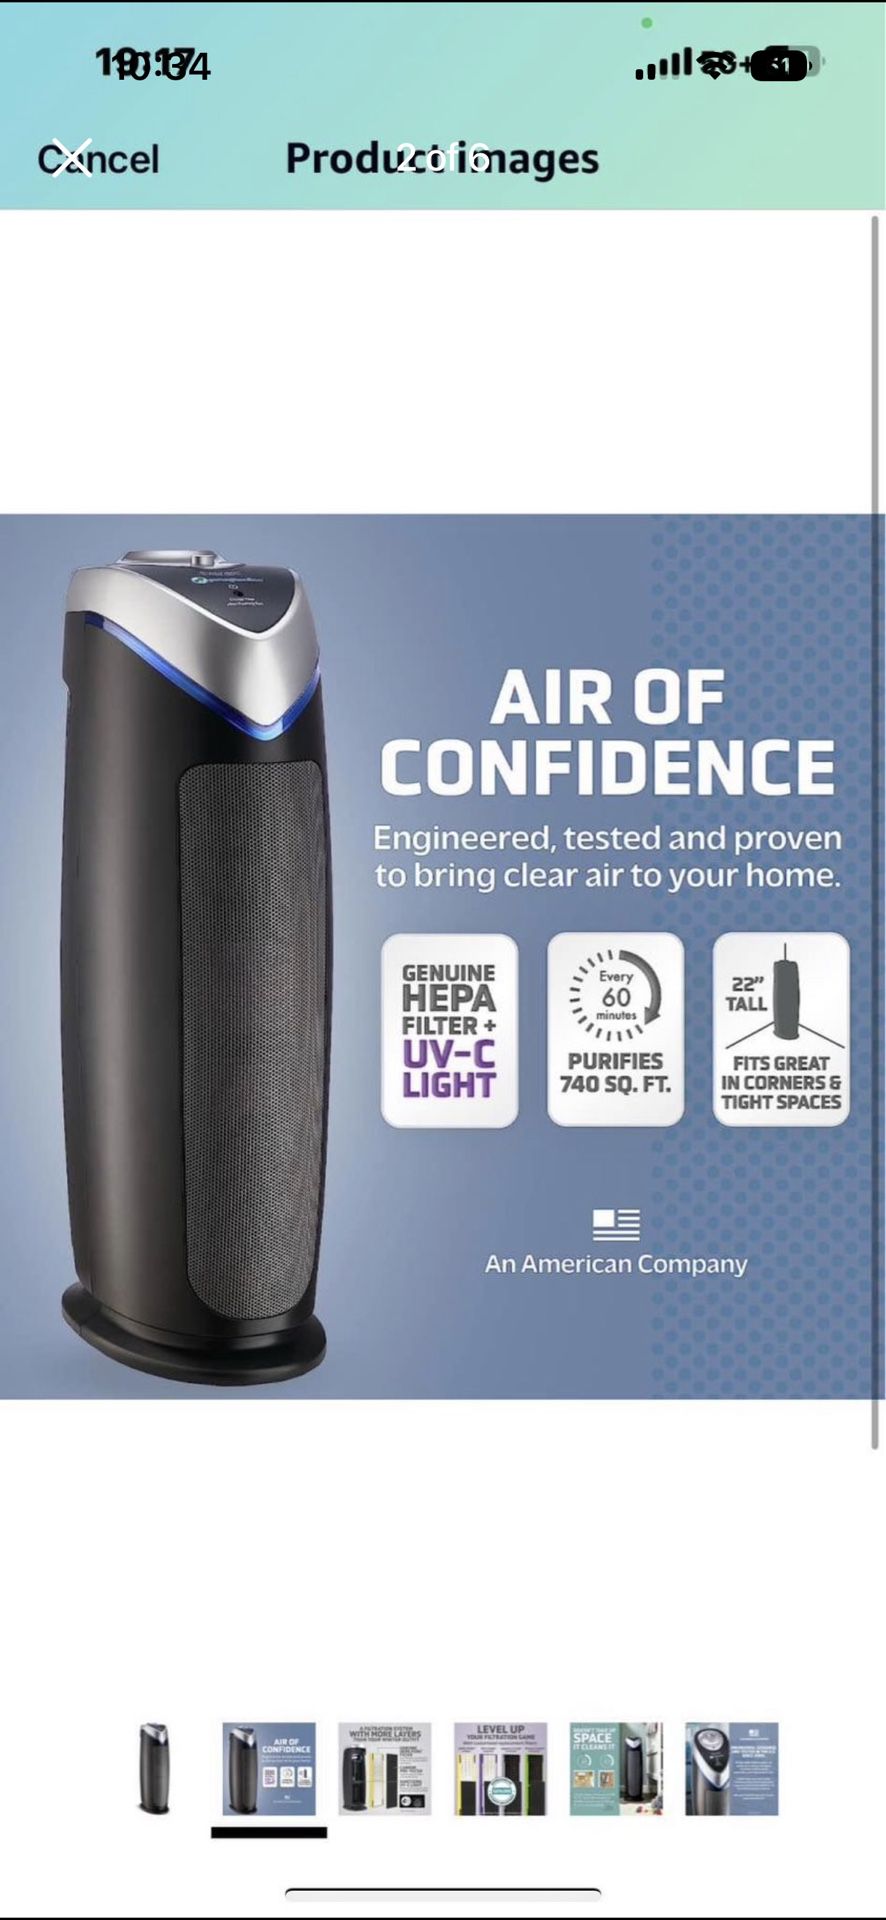 GermGuardian HEPA Air Purifier for Home, Large Room Air Purifiers with HEPA Filters, Removes 99.97% Pollutants, UV C, AC4825E